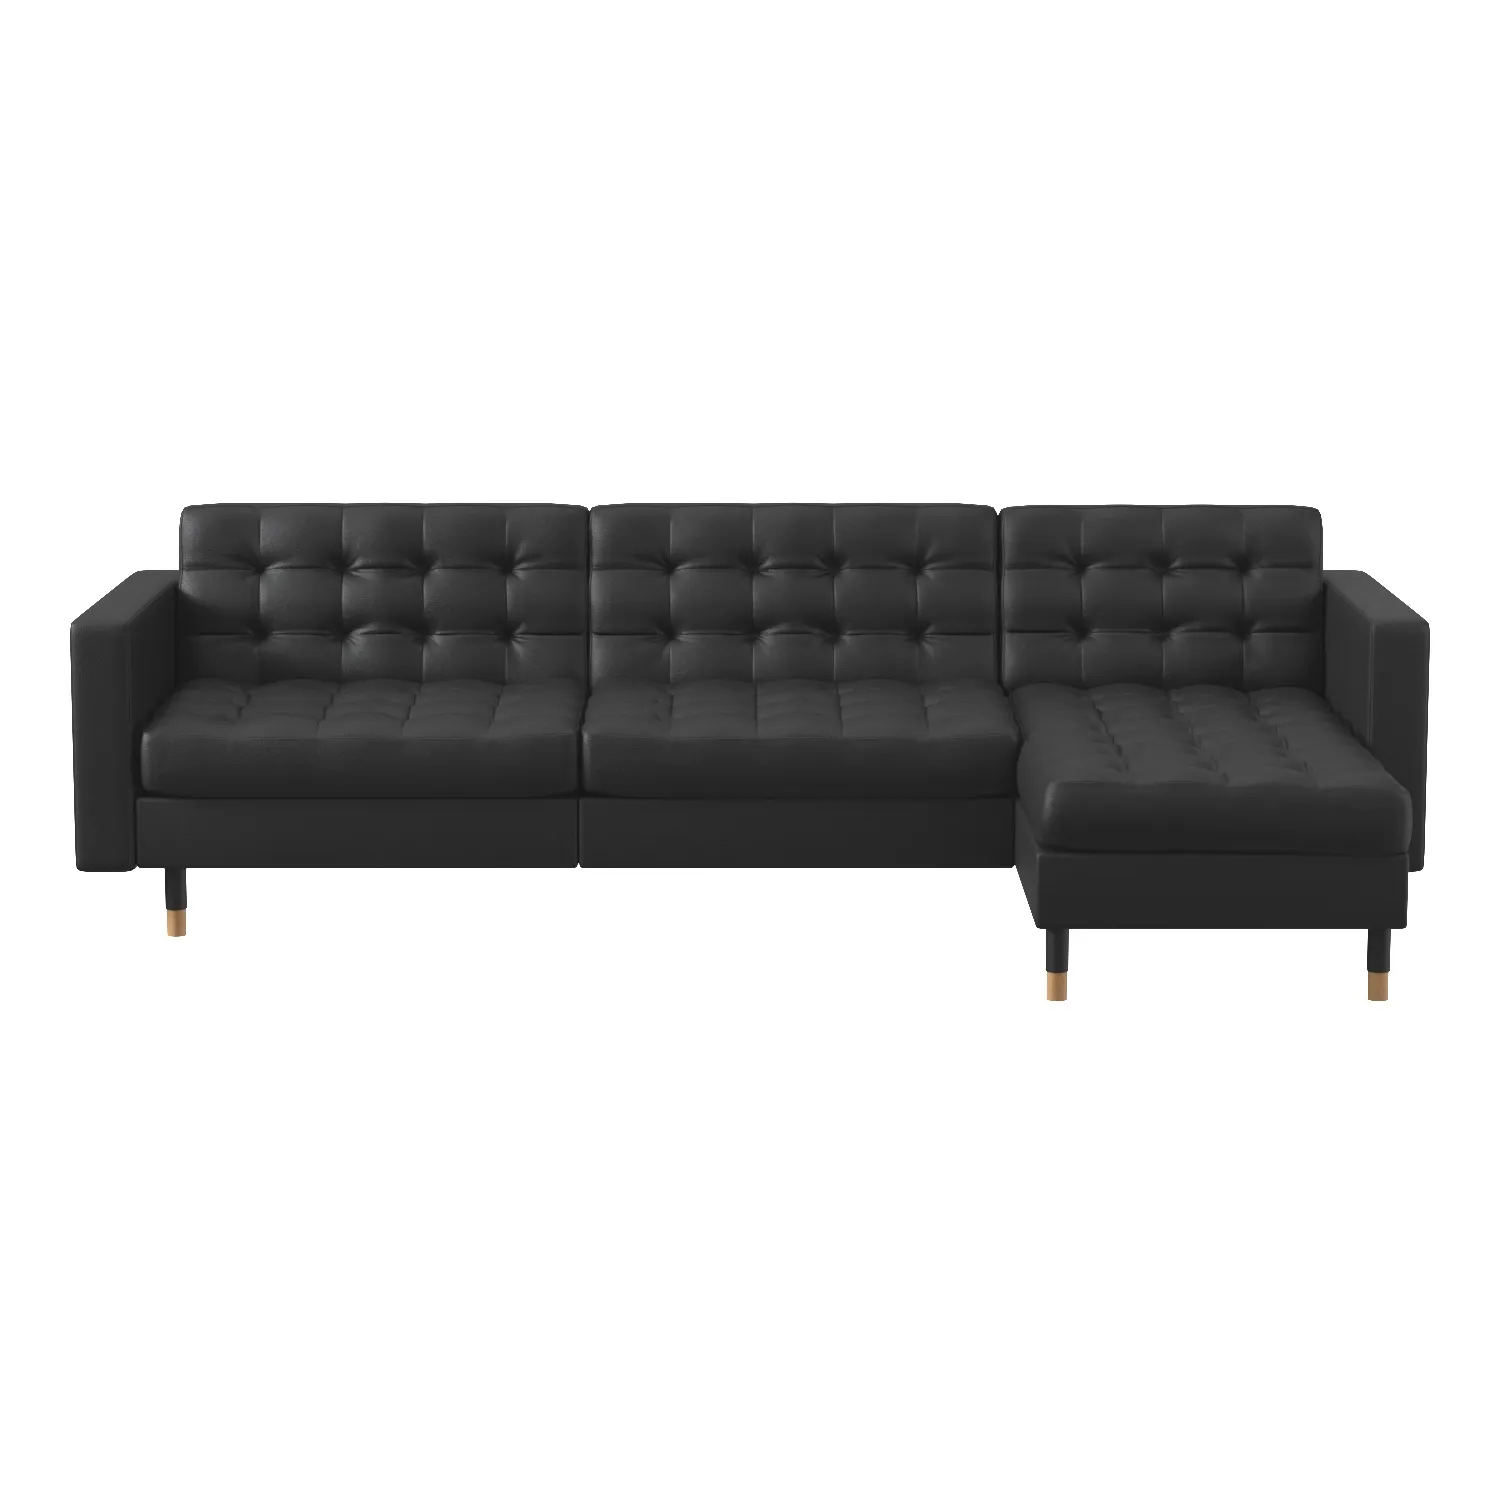 Ikea Morabo Sectional 4 seat With Chaise PBR 3D Model_06